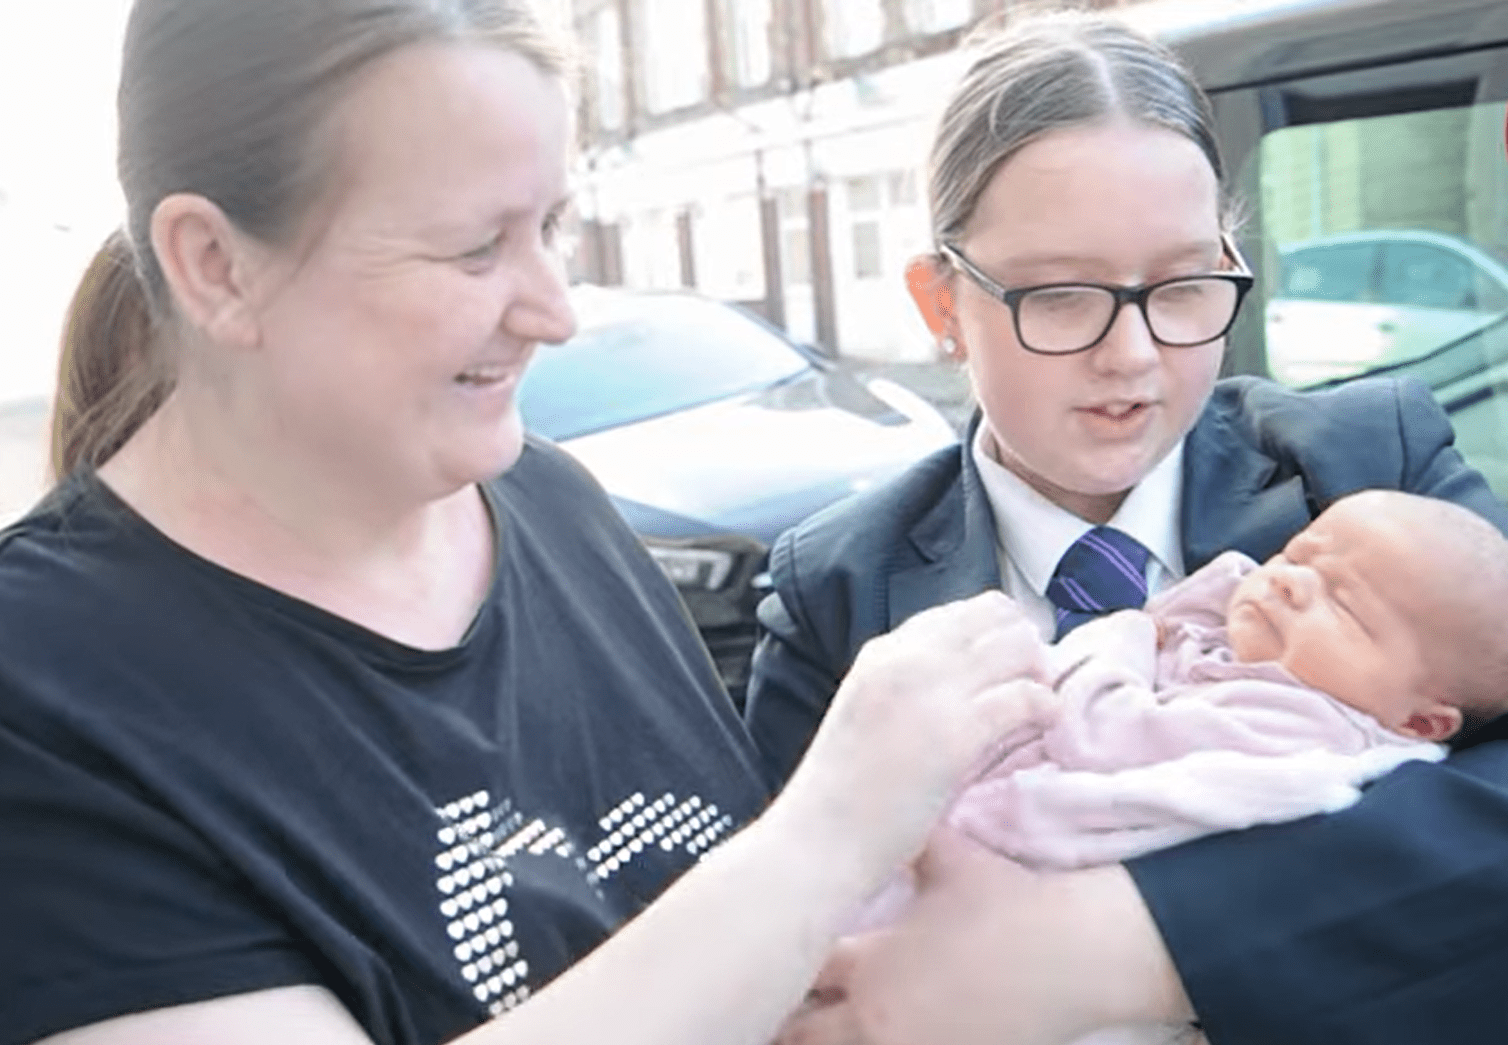 Nicola Thomas with Ellis Thomas who was holding her sister, Baylee-Rae in her arms.  |  Source: youtube.com/WalesOnline